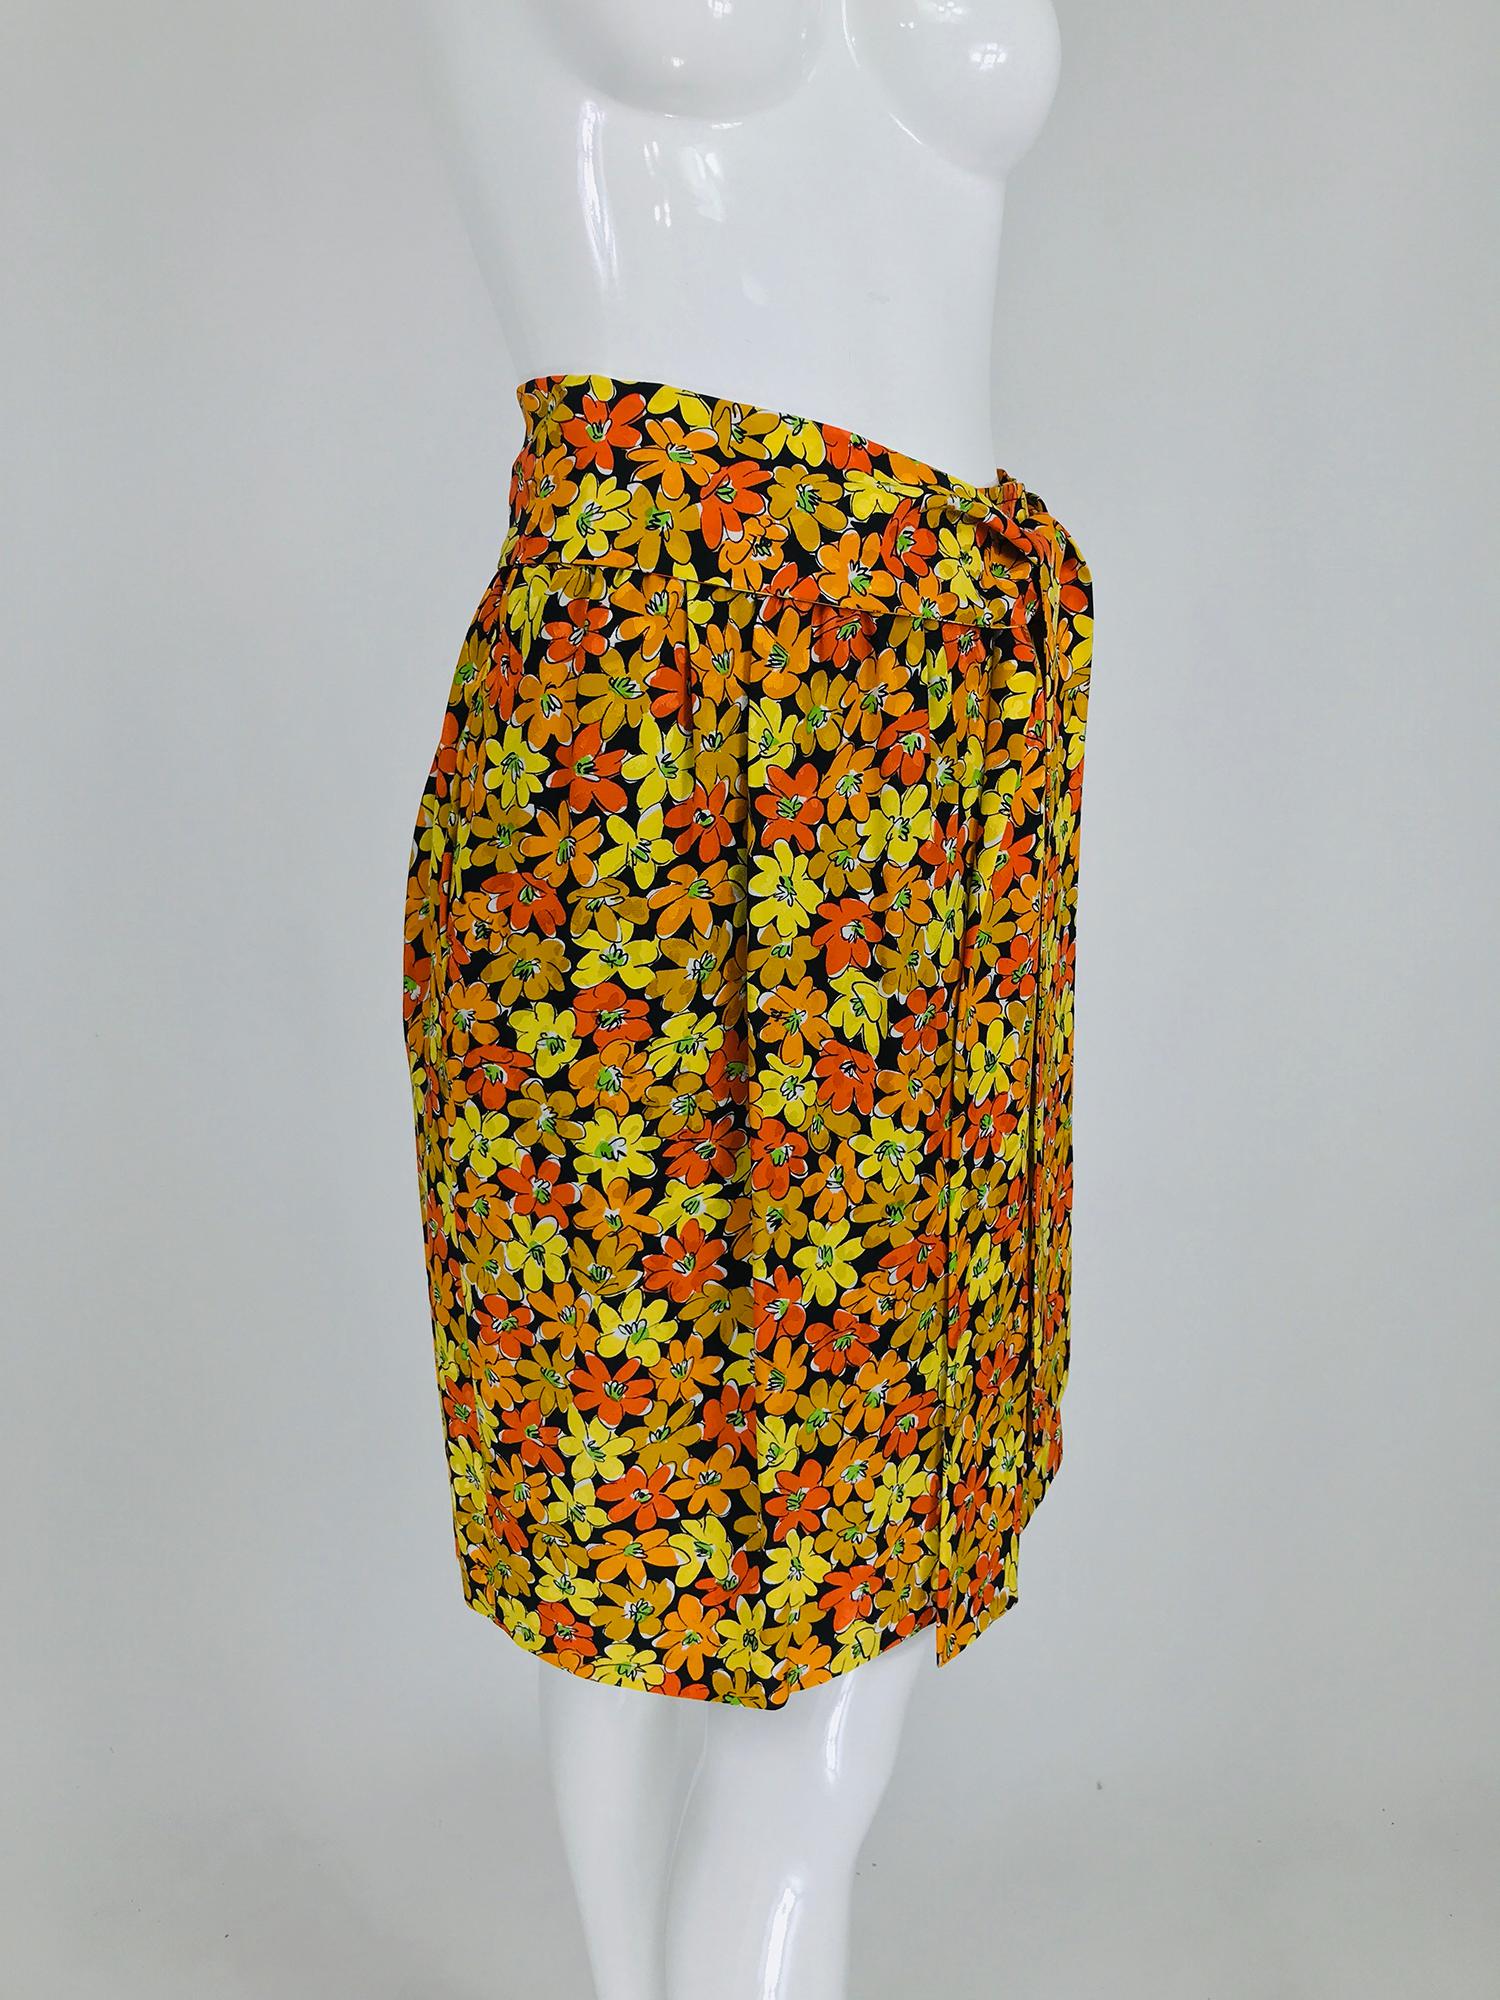 Vintage Yves Saint Laurent Rive Gauche vibrant floral silk print wrap skirt. This beautiful skirt is simple and elegant in style, a banded, gathered waist, the skirt wraps and closes with two bar hook at the front waist side. Together with the self